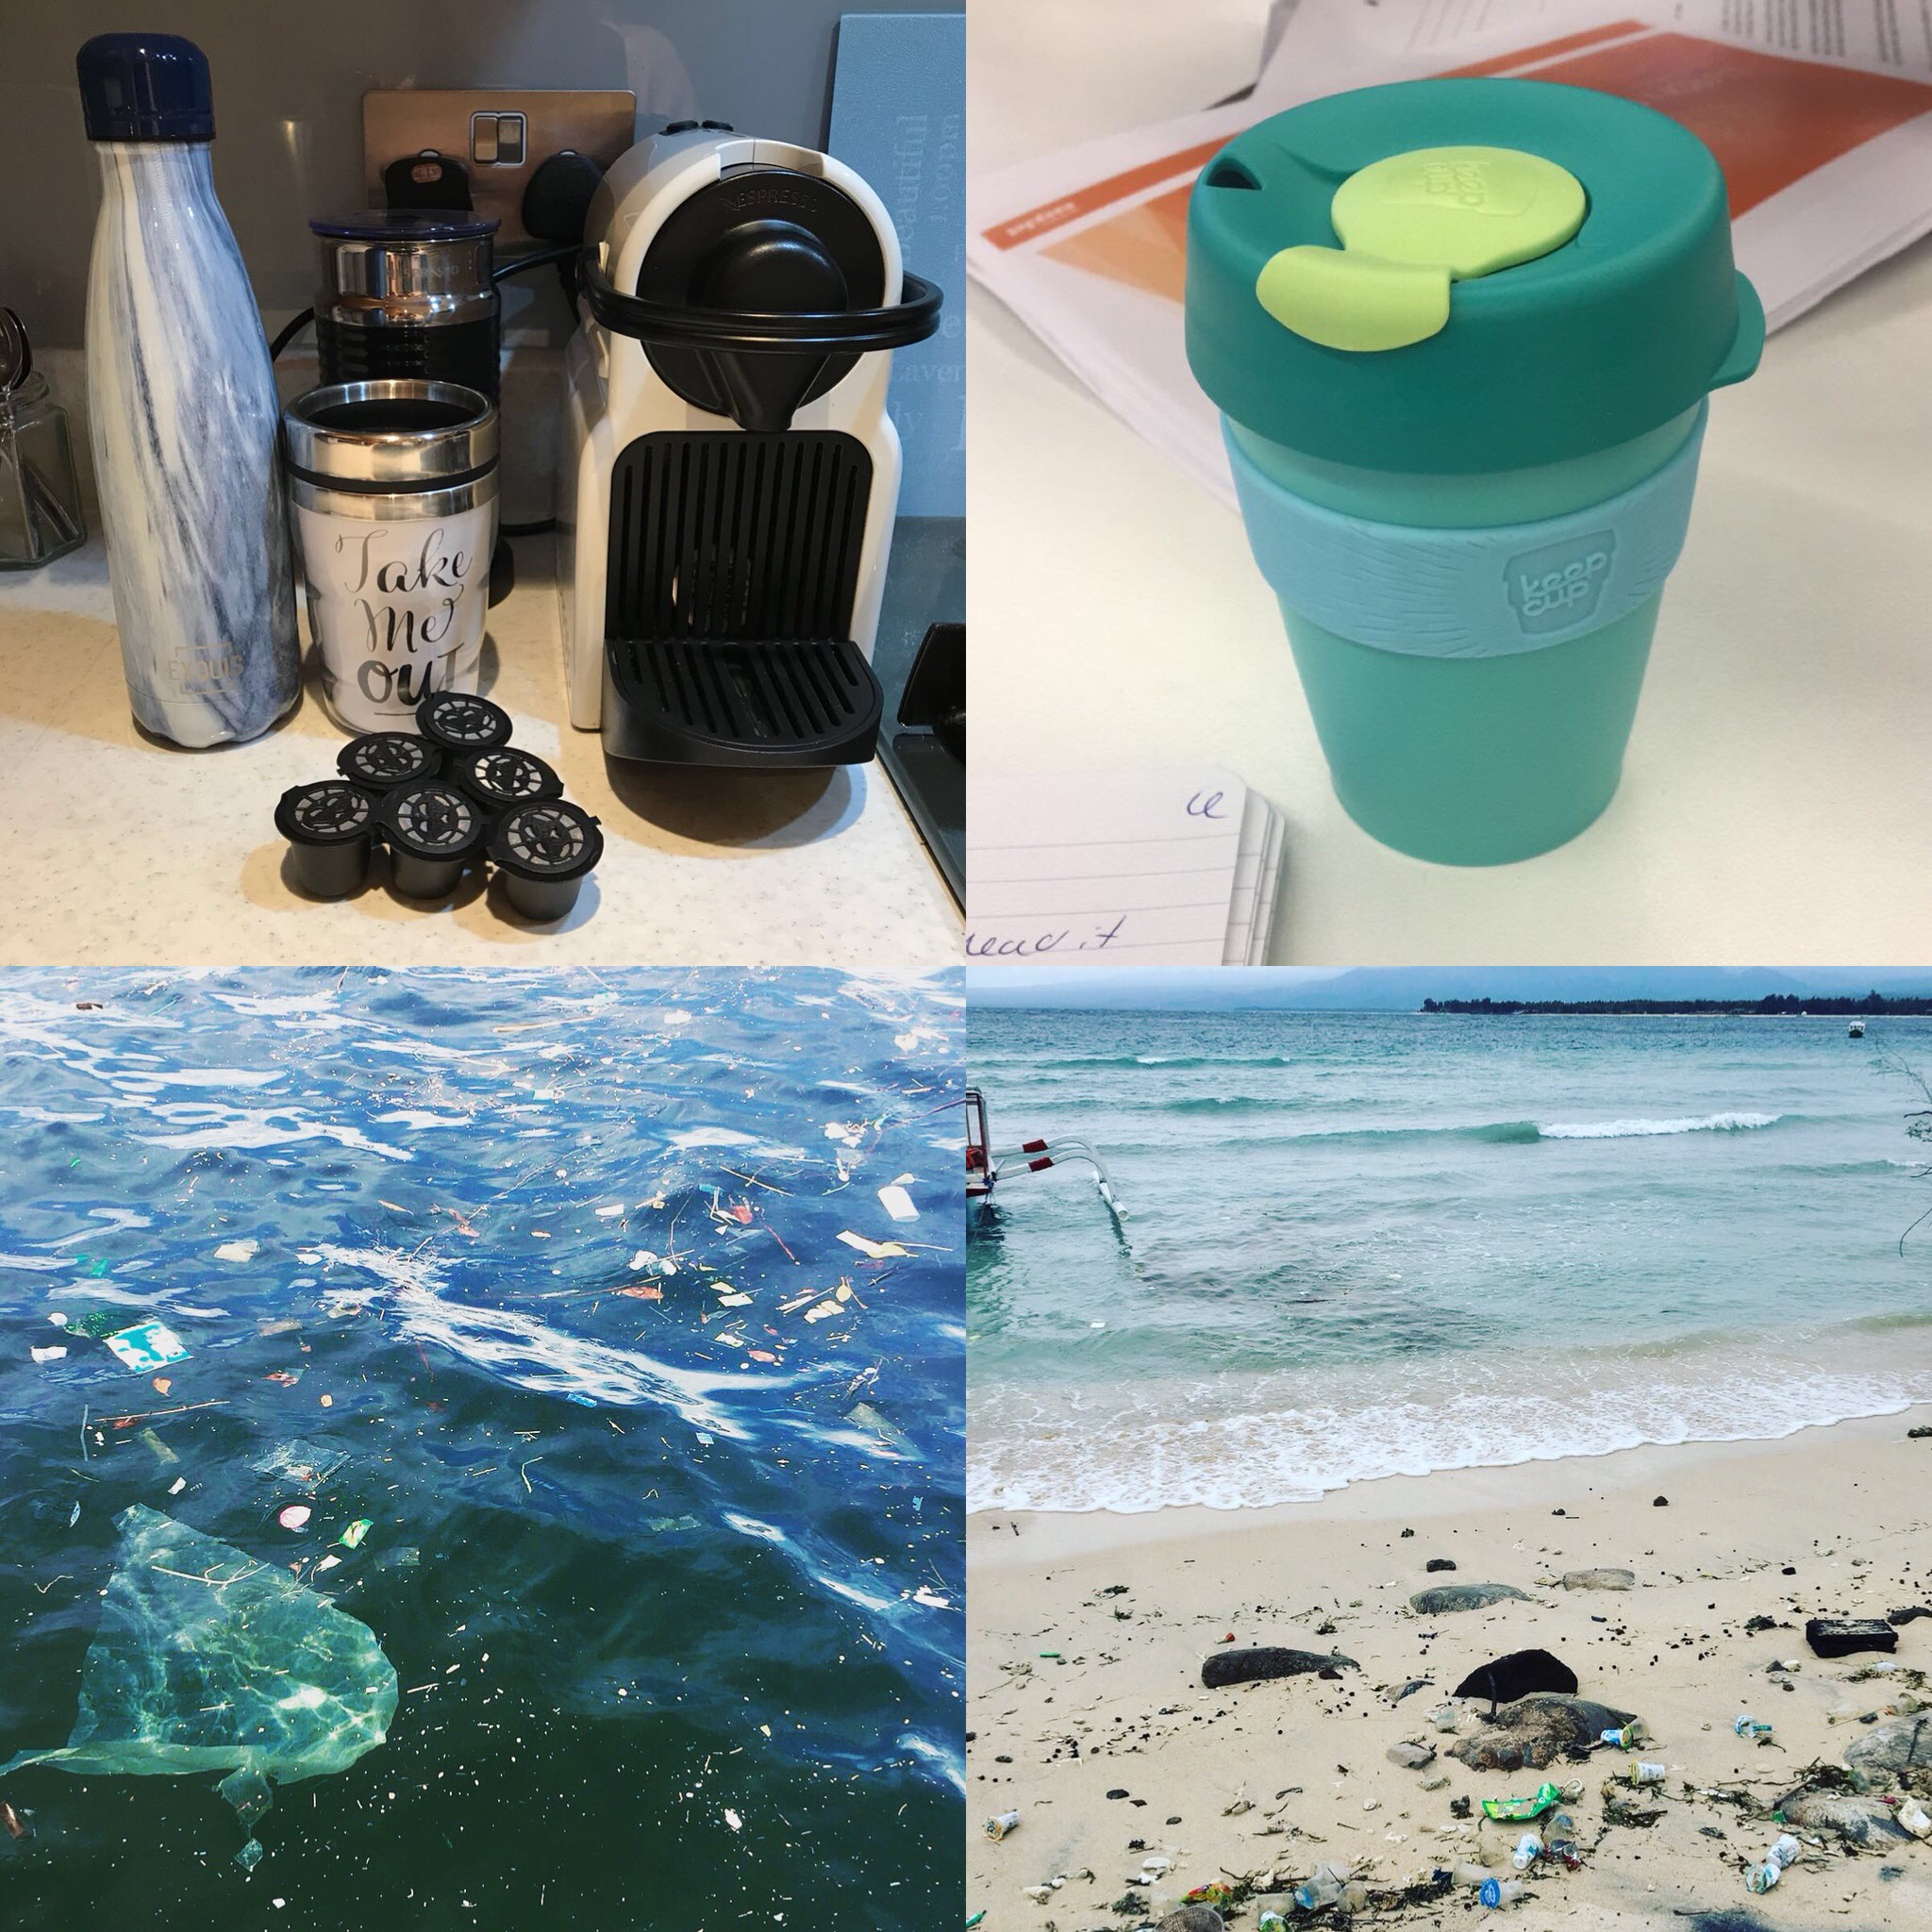 Making changes to ditch singleuse plastic